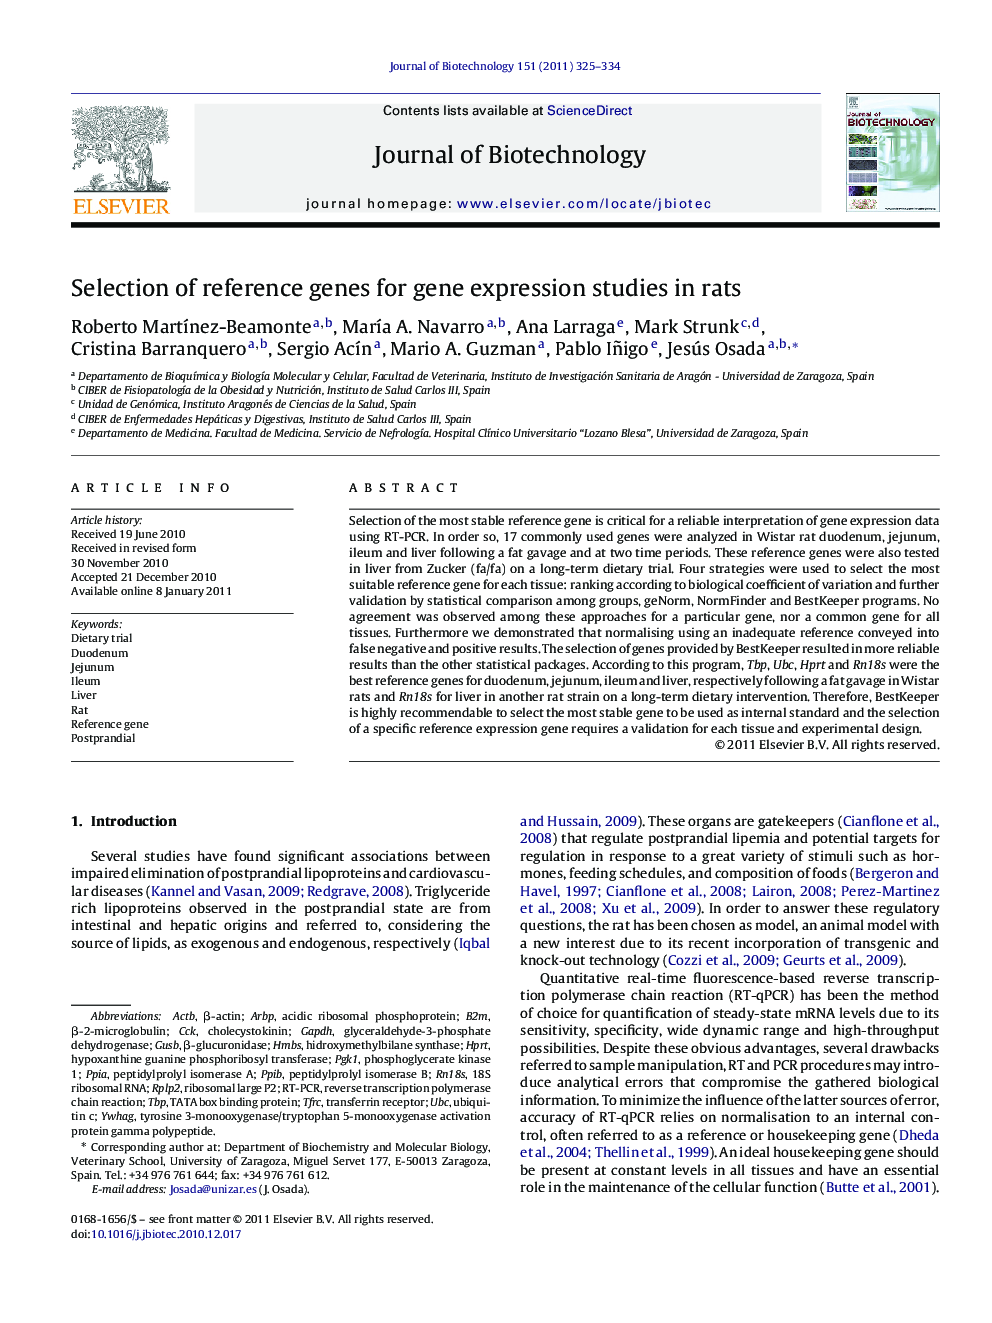 Selection of reference genes for gene expression studies in rats